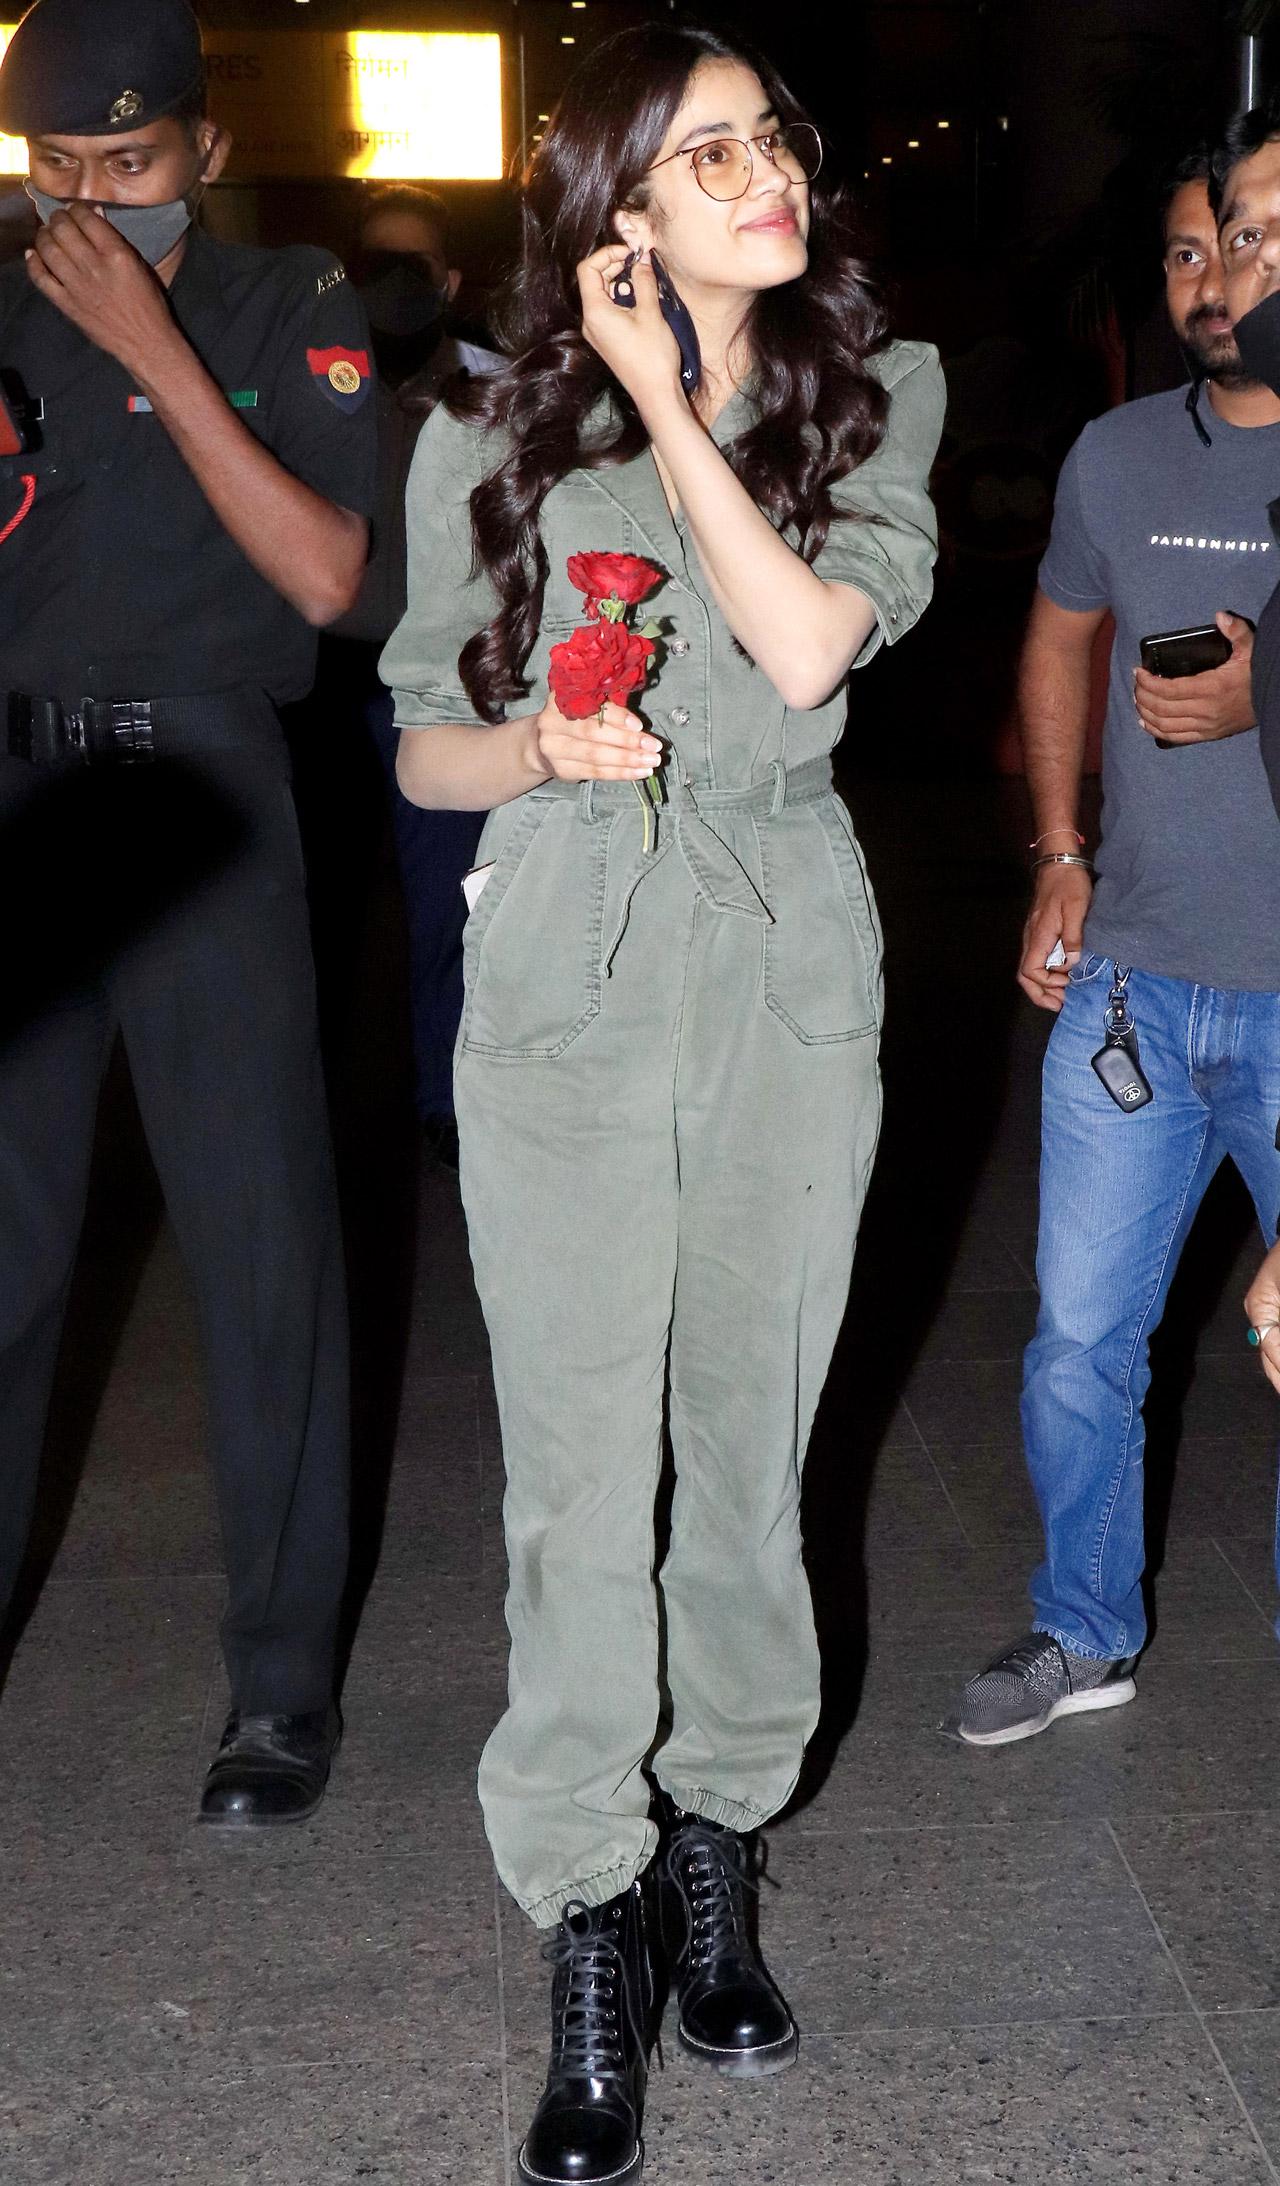 Janhvi Kapoor was all smile as she arrived at the Mumbai airport. The actress kept it chic in a jumpsuit as posed for the photographers. Janhvi, who turned a year older on March 6, had a cake cutting with the media as she arrived at the airport. The actress is currently busy promoting her upcoming horror-comedy Roohi, which also stars Rajkummar Rao and Varun Sharma.